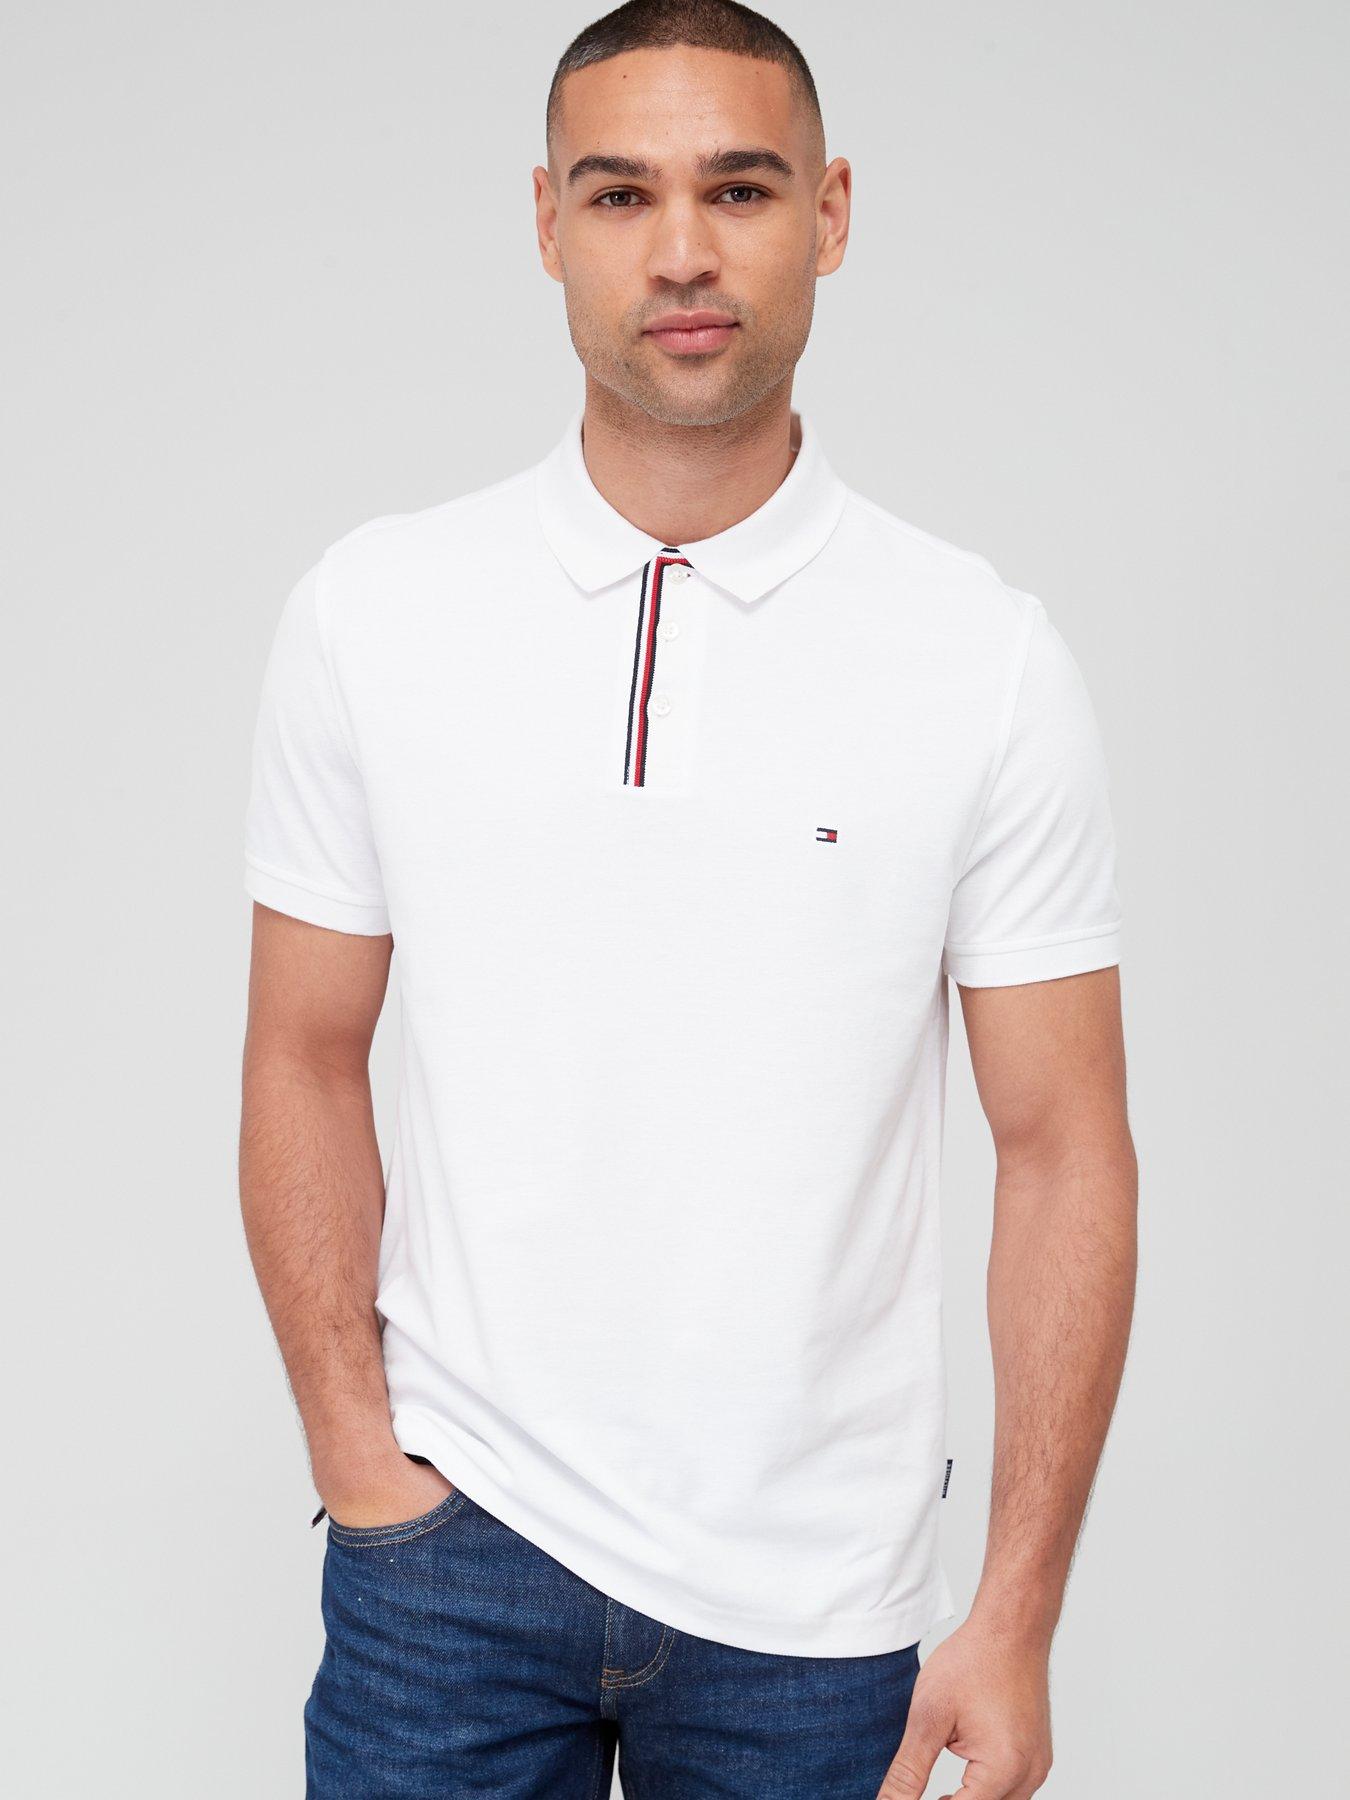 | | Friday | | All Deals Main Short Tommy polos Collection Black & Men hilfiger Sleeve | T-shirts